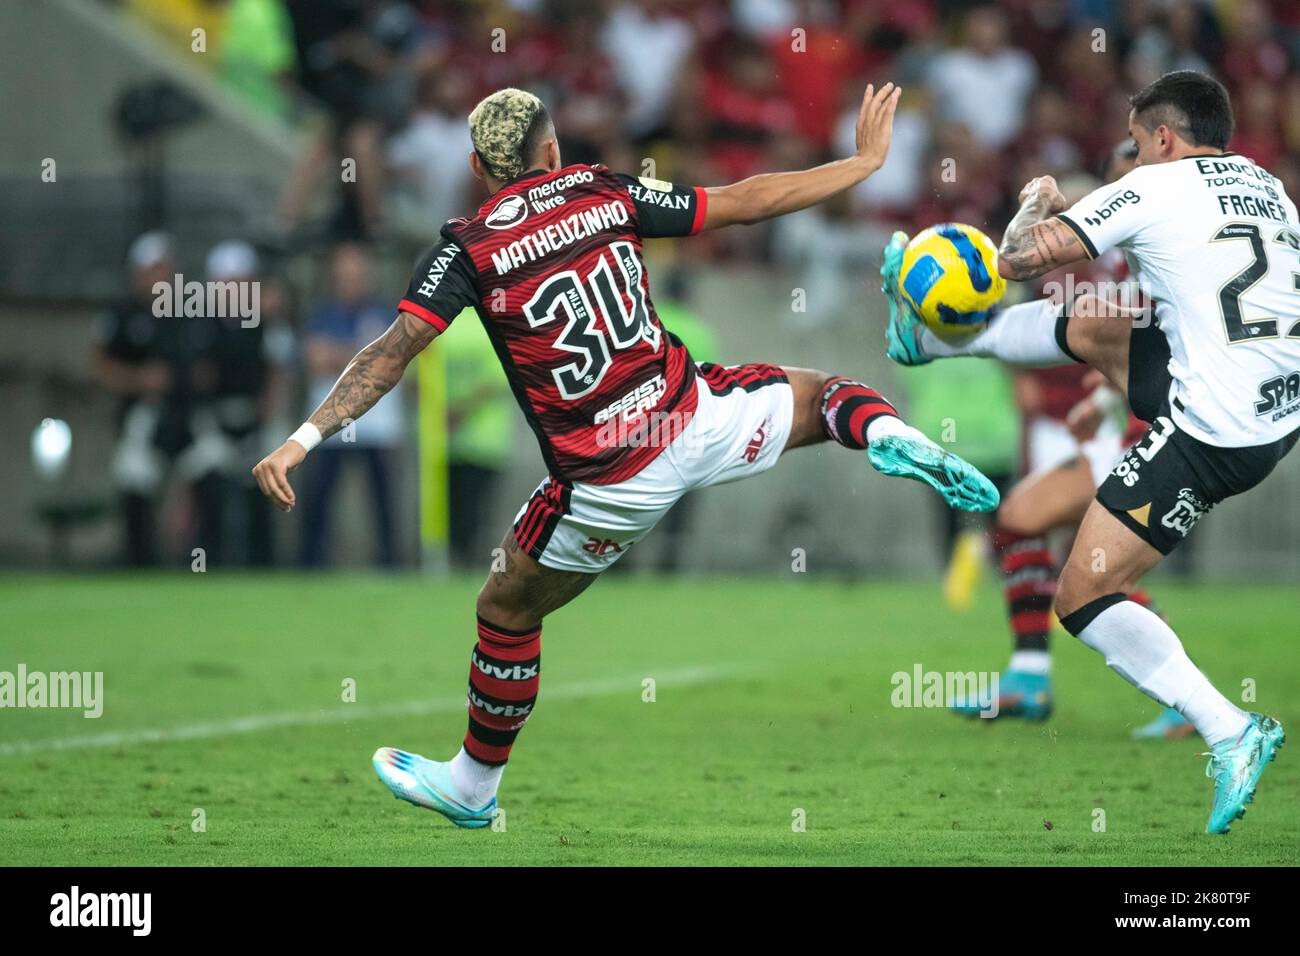 Rio, Brazil - October 19, 2022: Matheuzinho player in match between Flamengo vs Corinthians by second match of final round of Brazilian Cup in Maracan Stock Photo